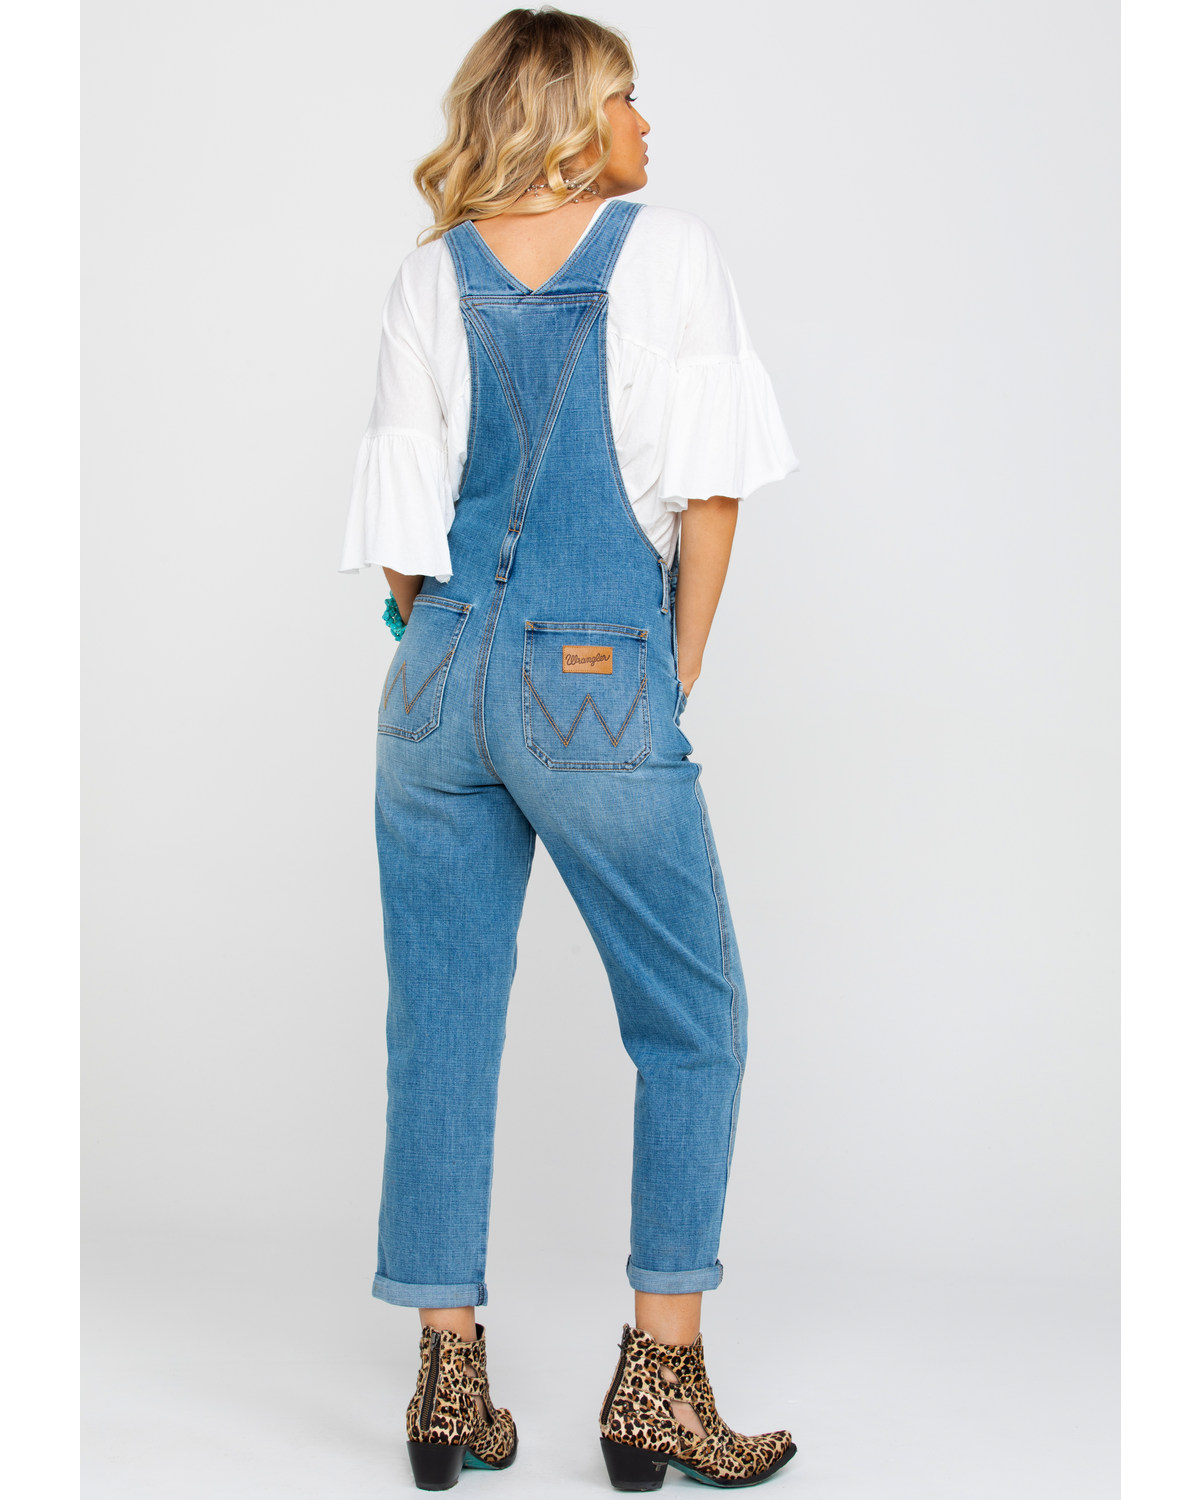 Texas Heritage High Rise Denim Overall 